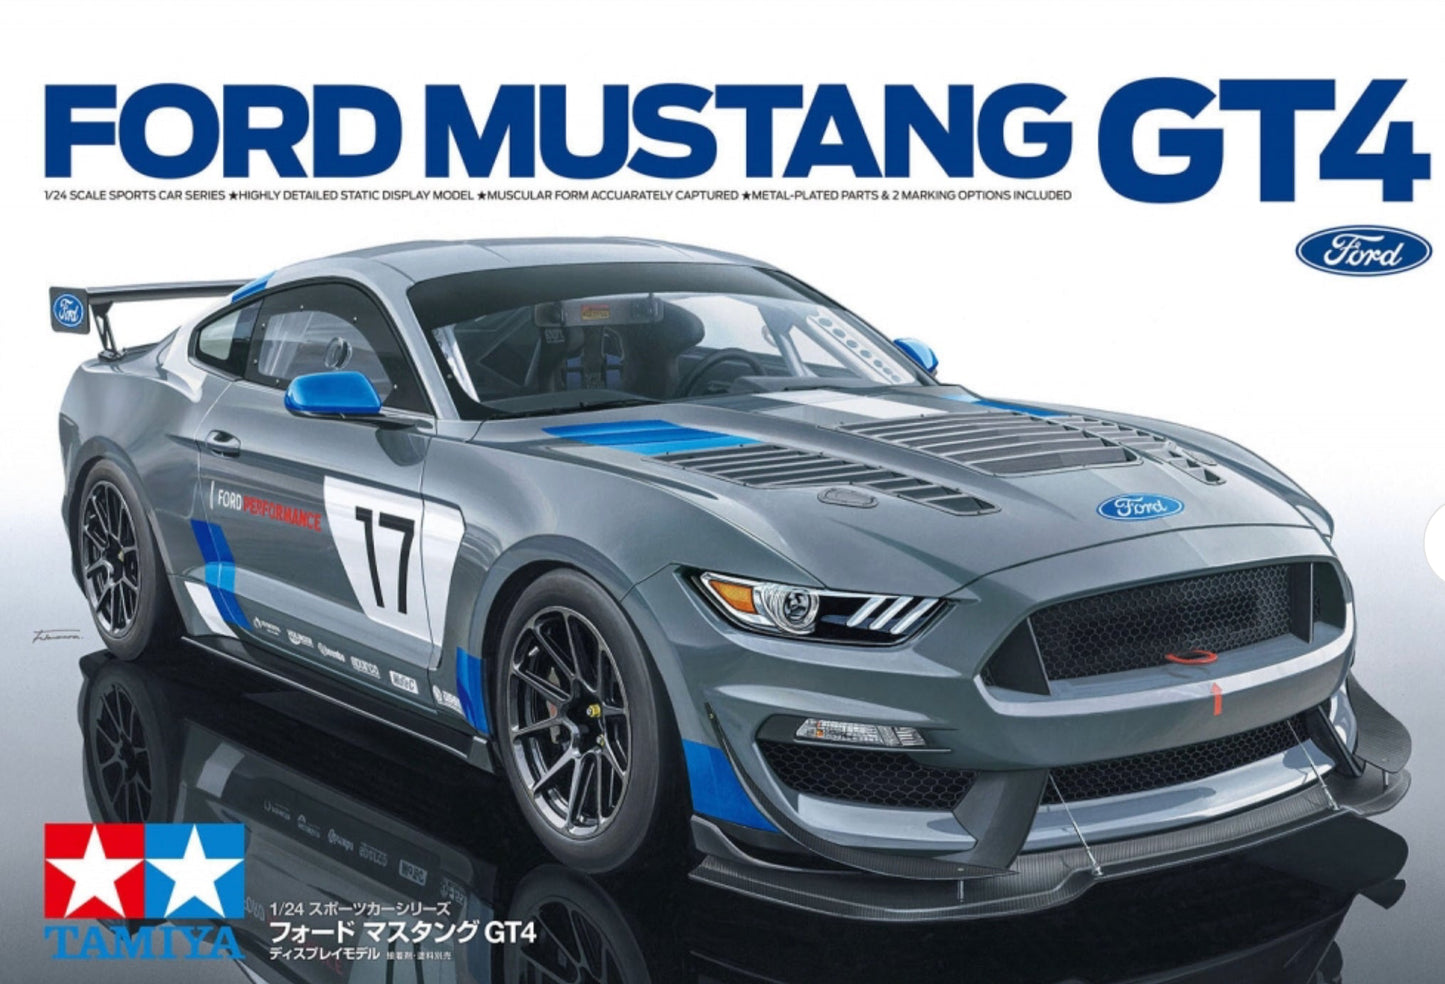 FORD MUSTANG GT4